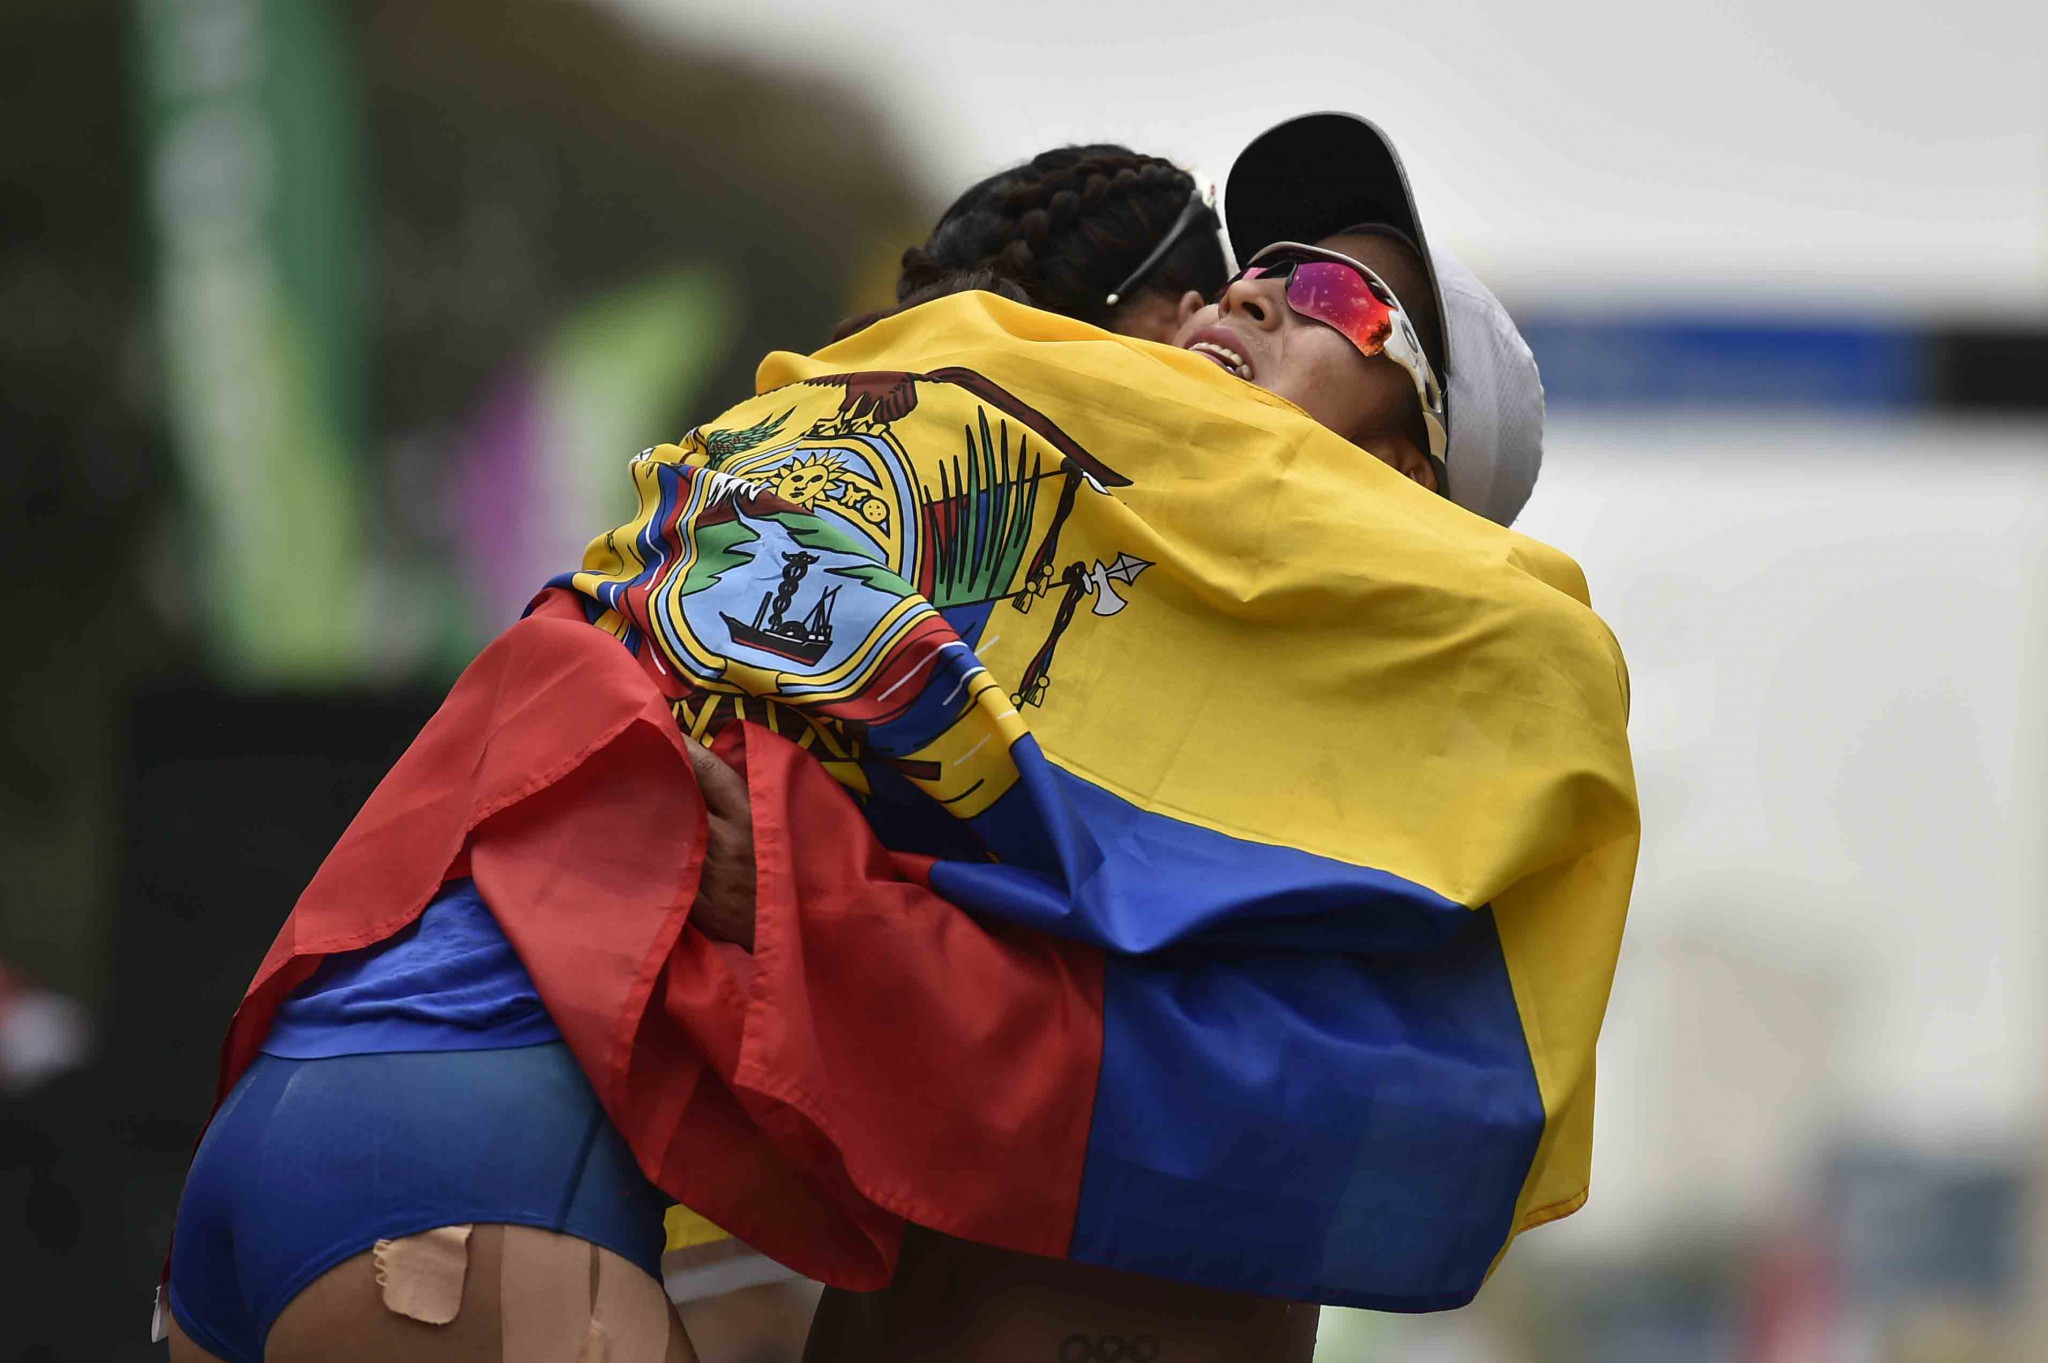 Racewalker Paola Pérez is among those that are set to benefit from the Ecuador Olympic Committee's support ©Getty Images